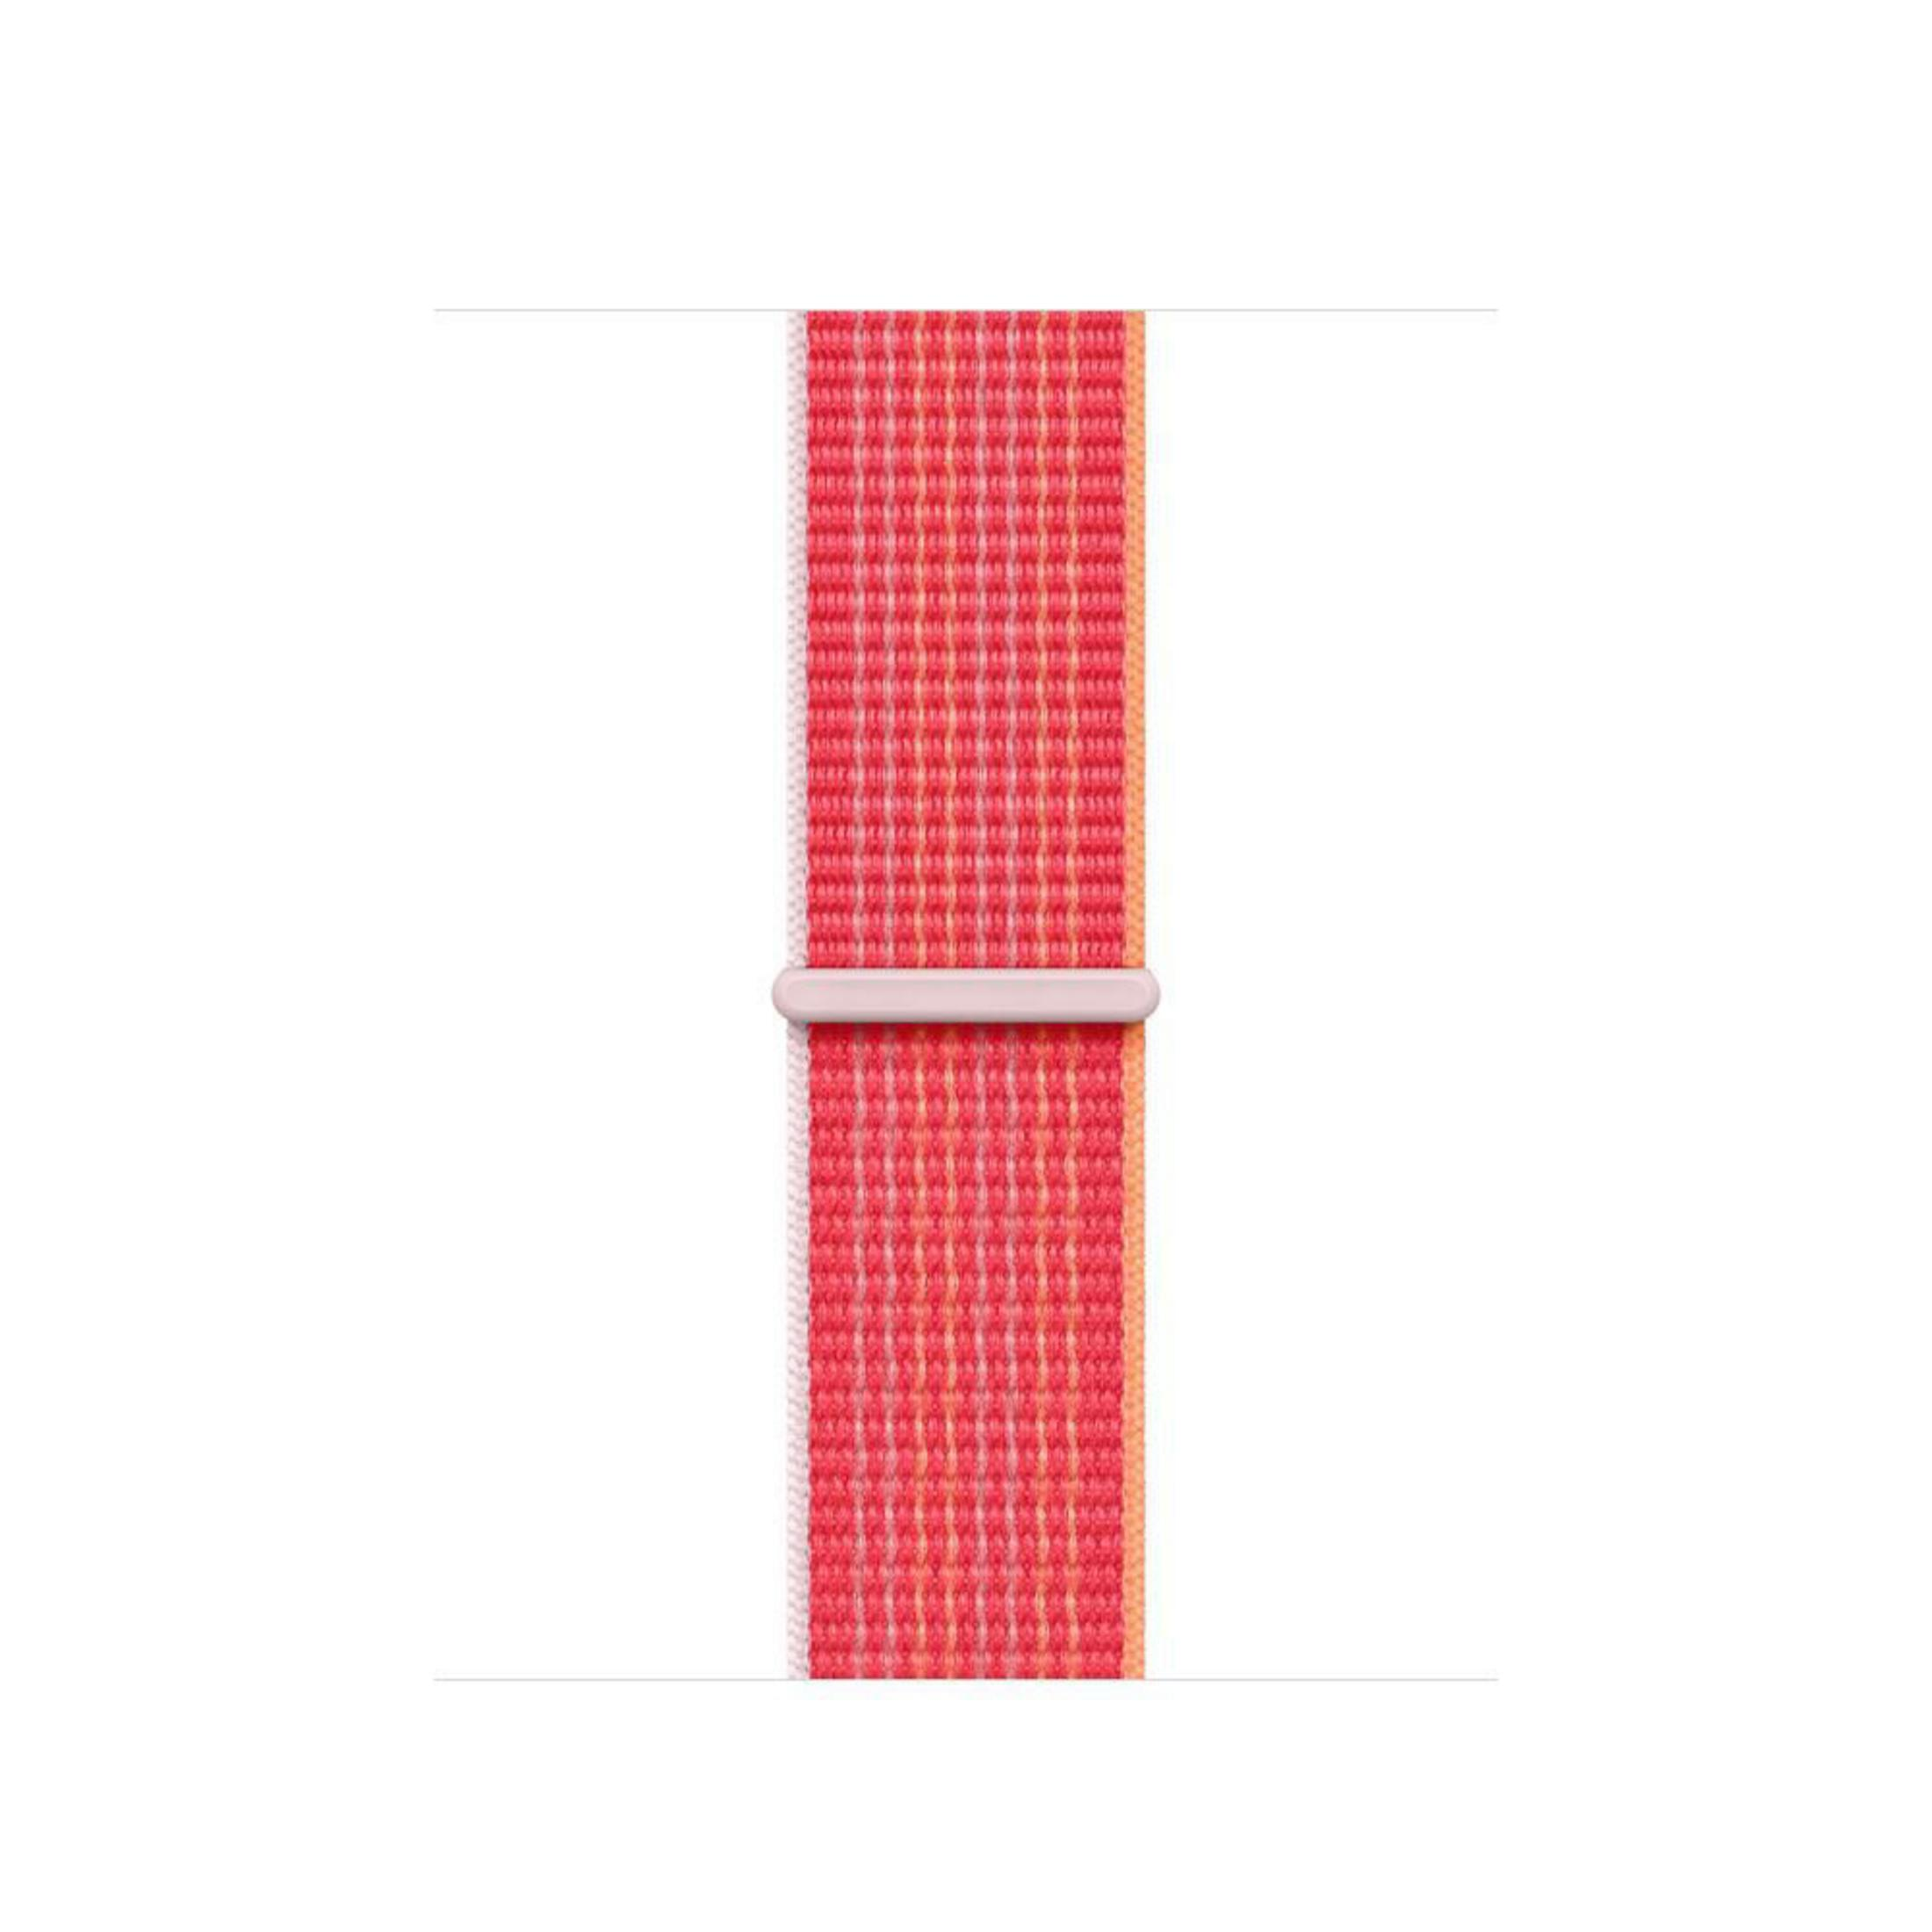 MPL83ZM/A Modelle: Watch APPLE Ersatzarmband, 41MM Apple, mm, 38 41 SPORT RED LOOP, mm, 40 Product-Red mm,